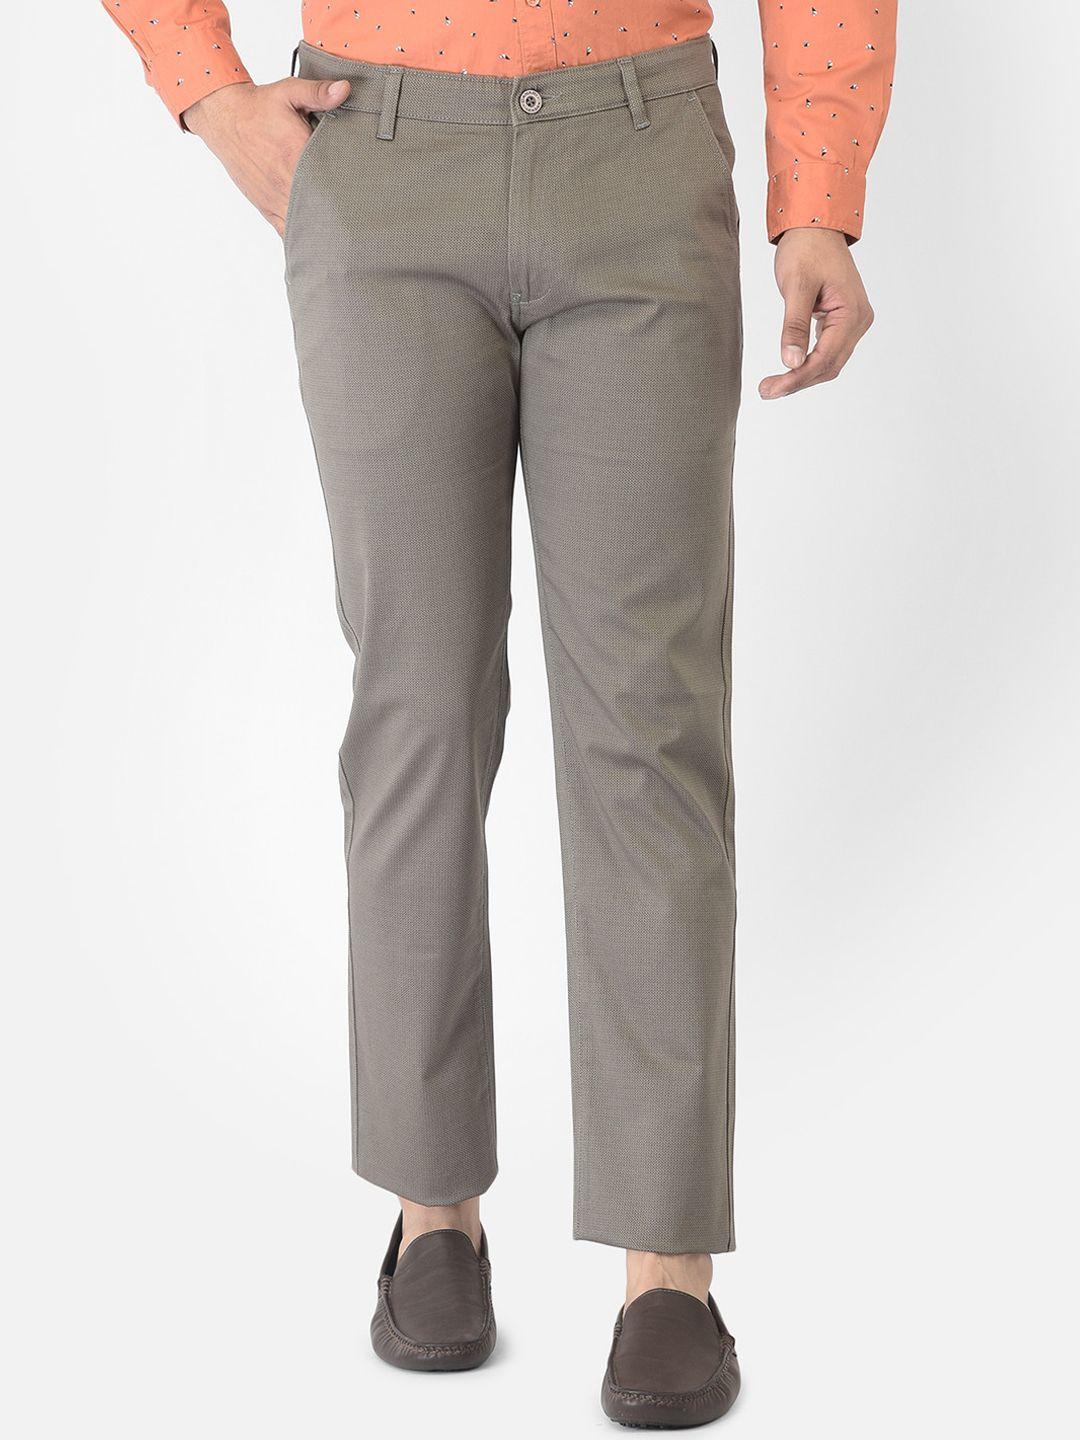 canary london men taupe textured printed smart slim fit wrinkle free trousers